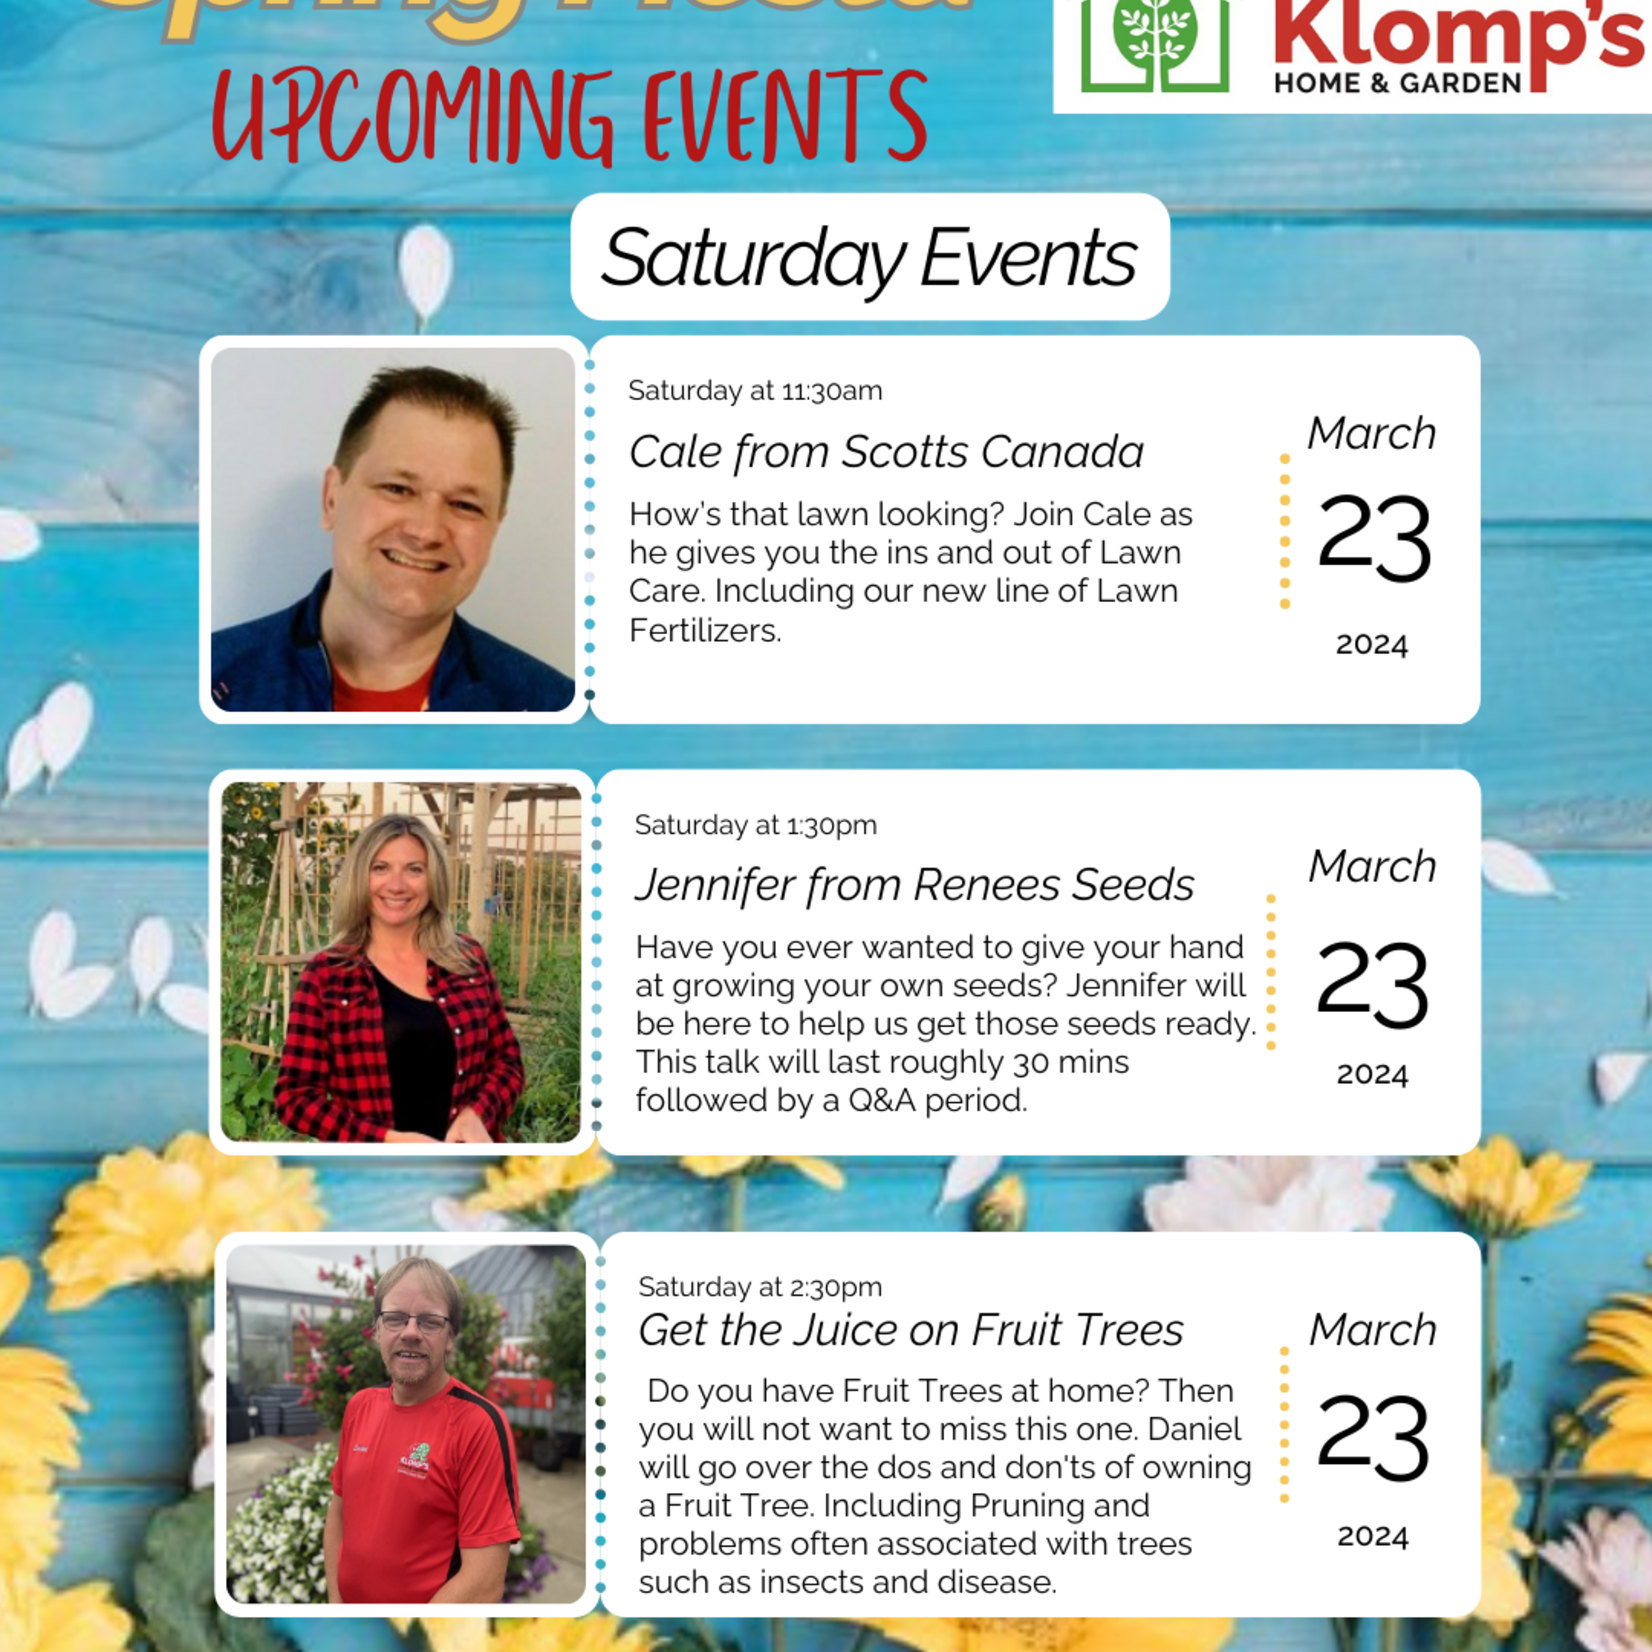 Spring Fiesta | Daniel from Klomp's | Saturday March 23rd at 2:30pm